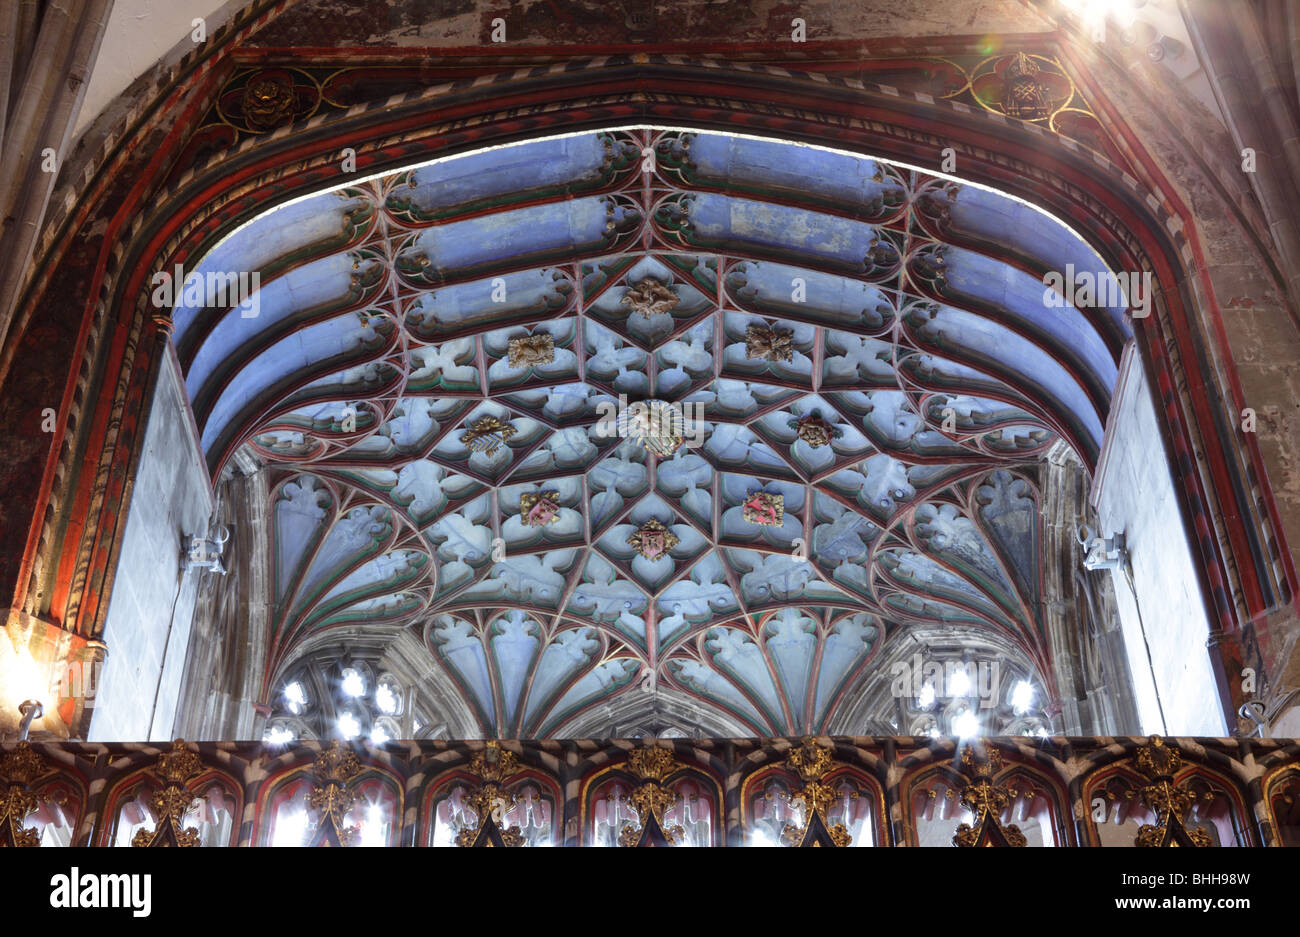 The beautiful adorned Early English Chantry  ceiling at Hereford Cathedral,part of the Lady Chapel with public access denied. Stock Photo